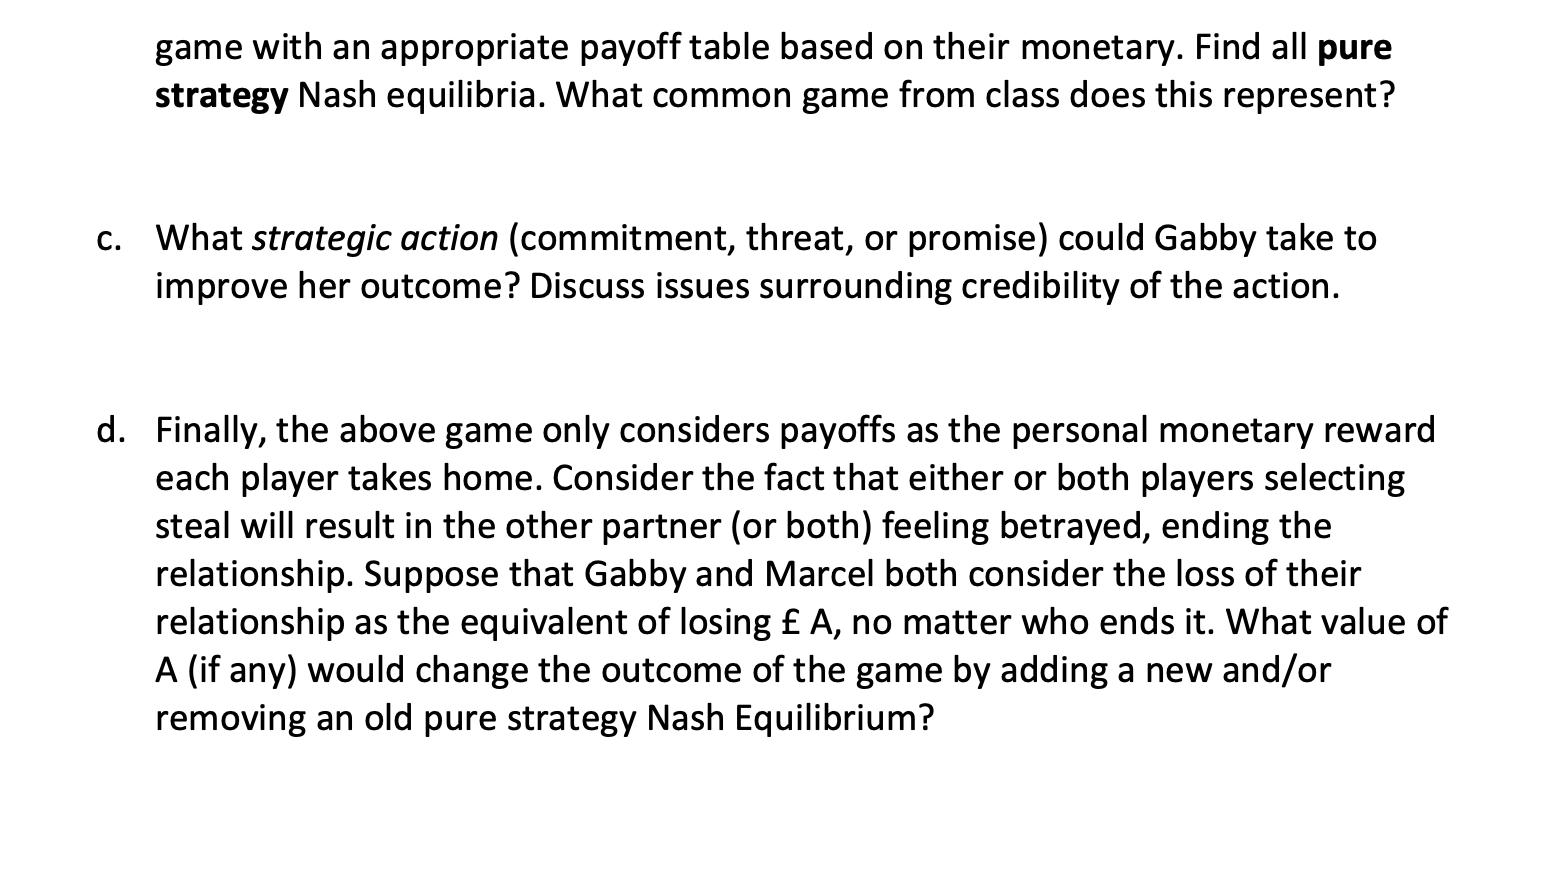 game with an appropriate payoff table based on their monetary. Find all pure strategy Nash equilibria. What common game from